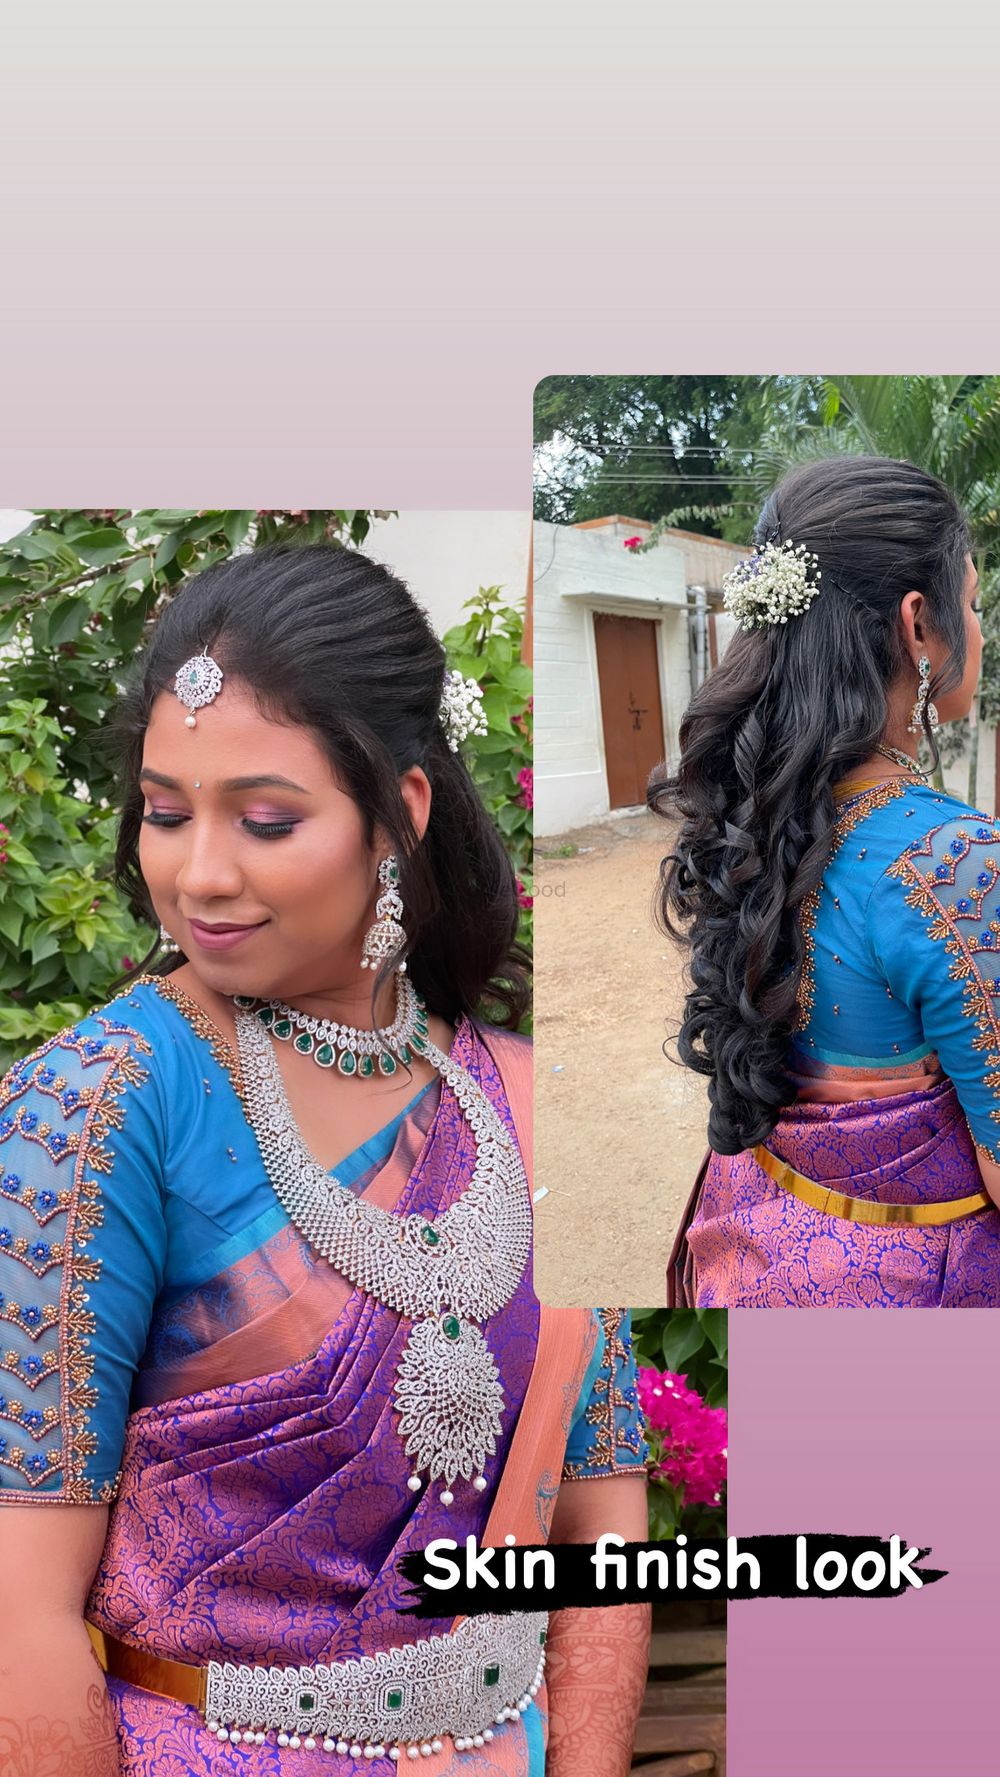 Photo From Bridal Album - By NUXE Makeover